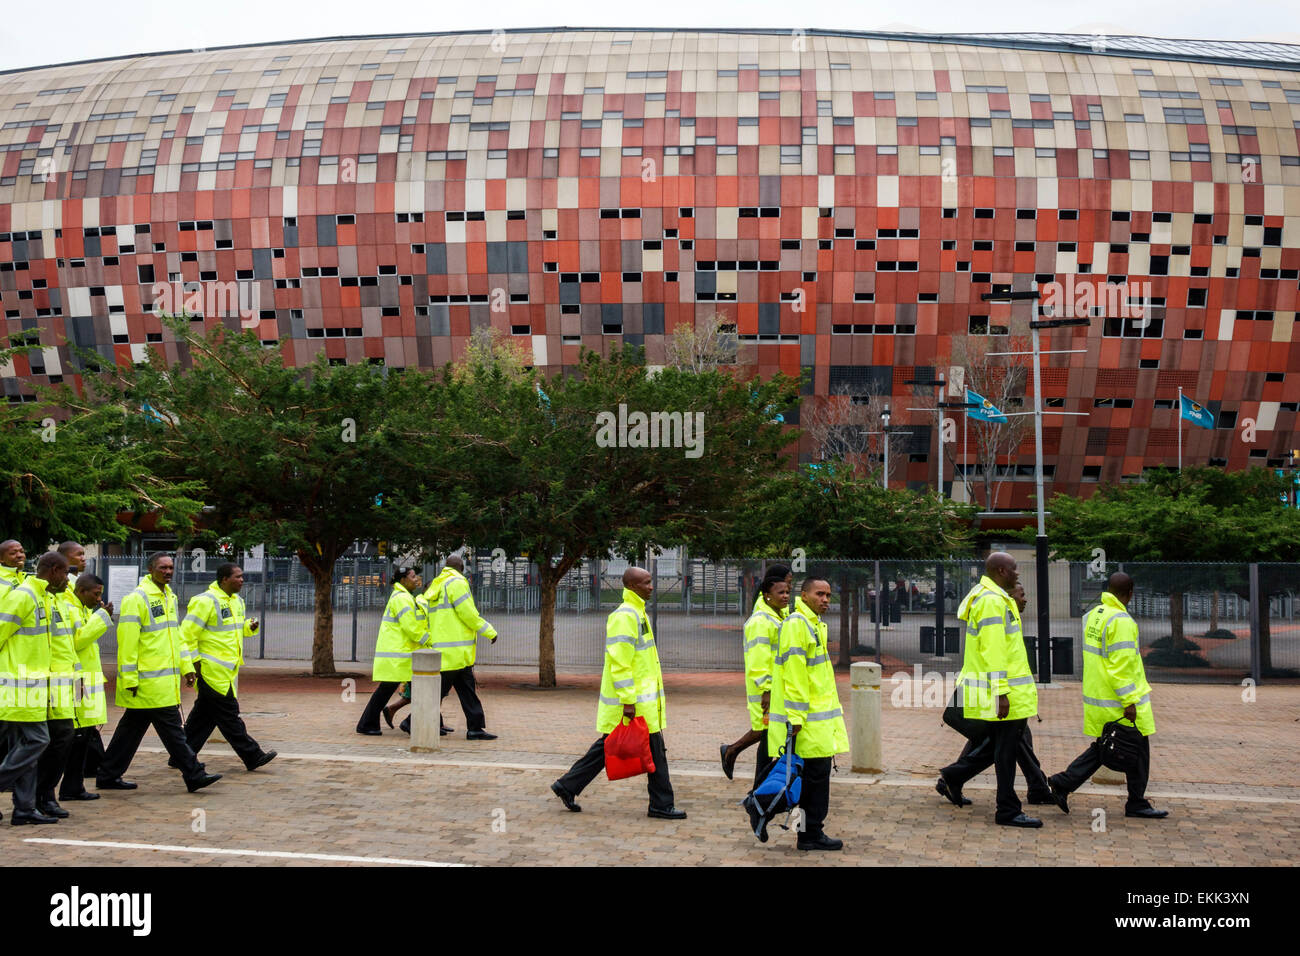 Johannesburg South Africa,Nasrec,FNB Soccer City Stadium,The Calabash,Black man men male,woman female women,security guards,employee worker workers wo Stock Photo